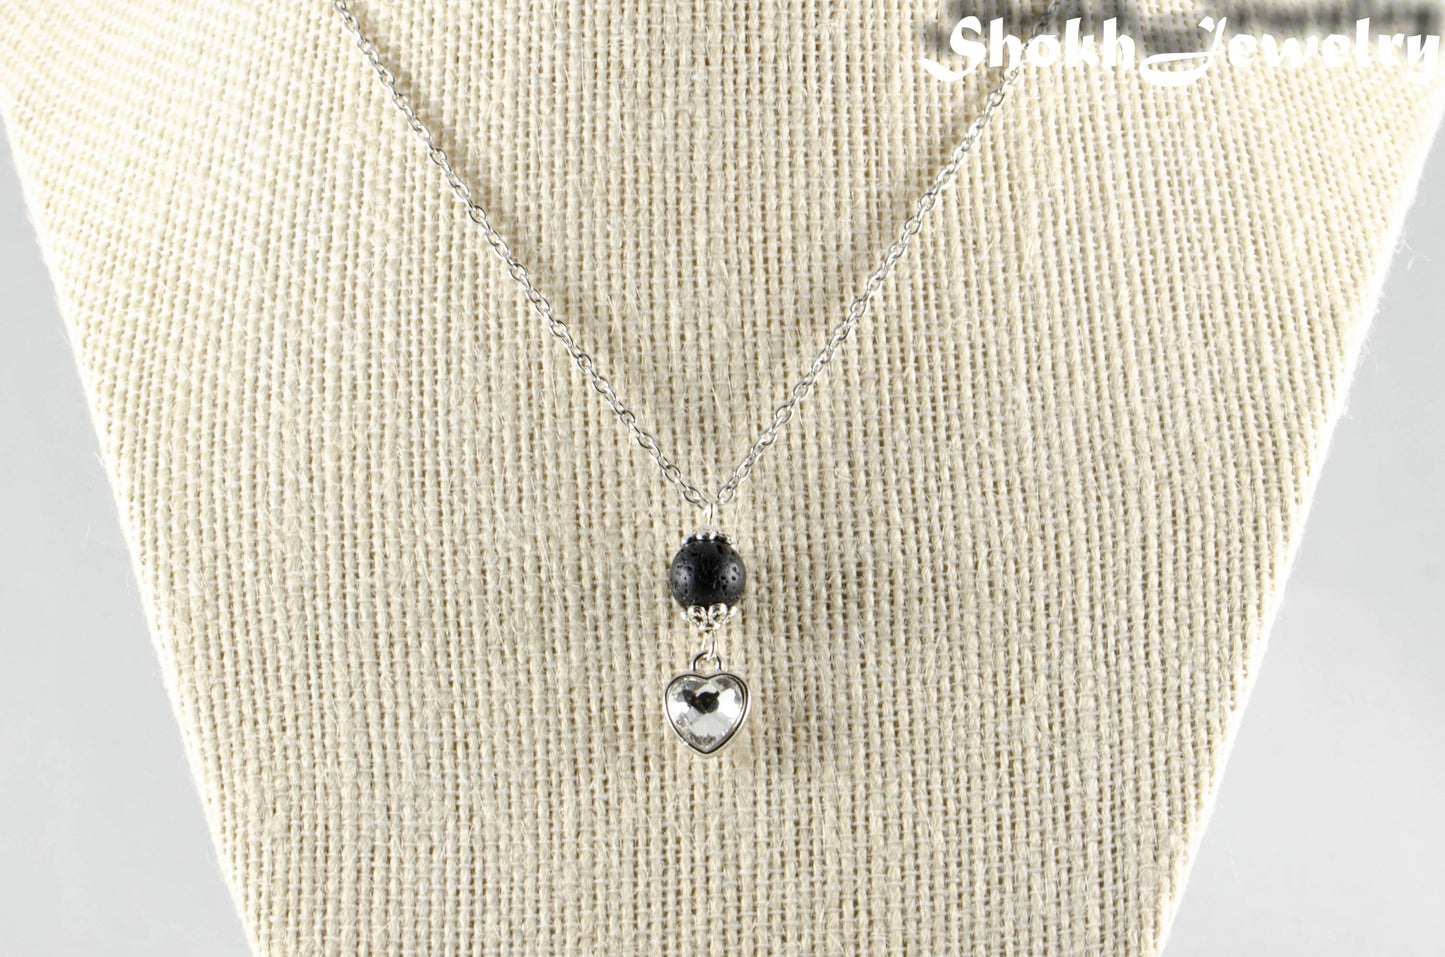 Lava Rock and Heart Shaped April Birthstone Choker Necklace displayed on a dime.